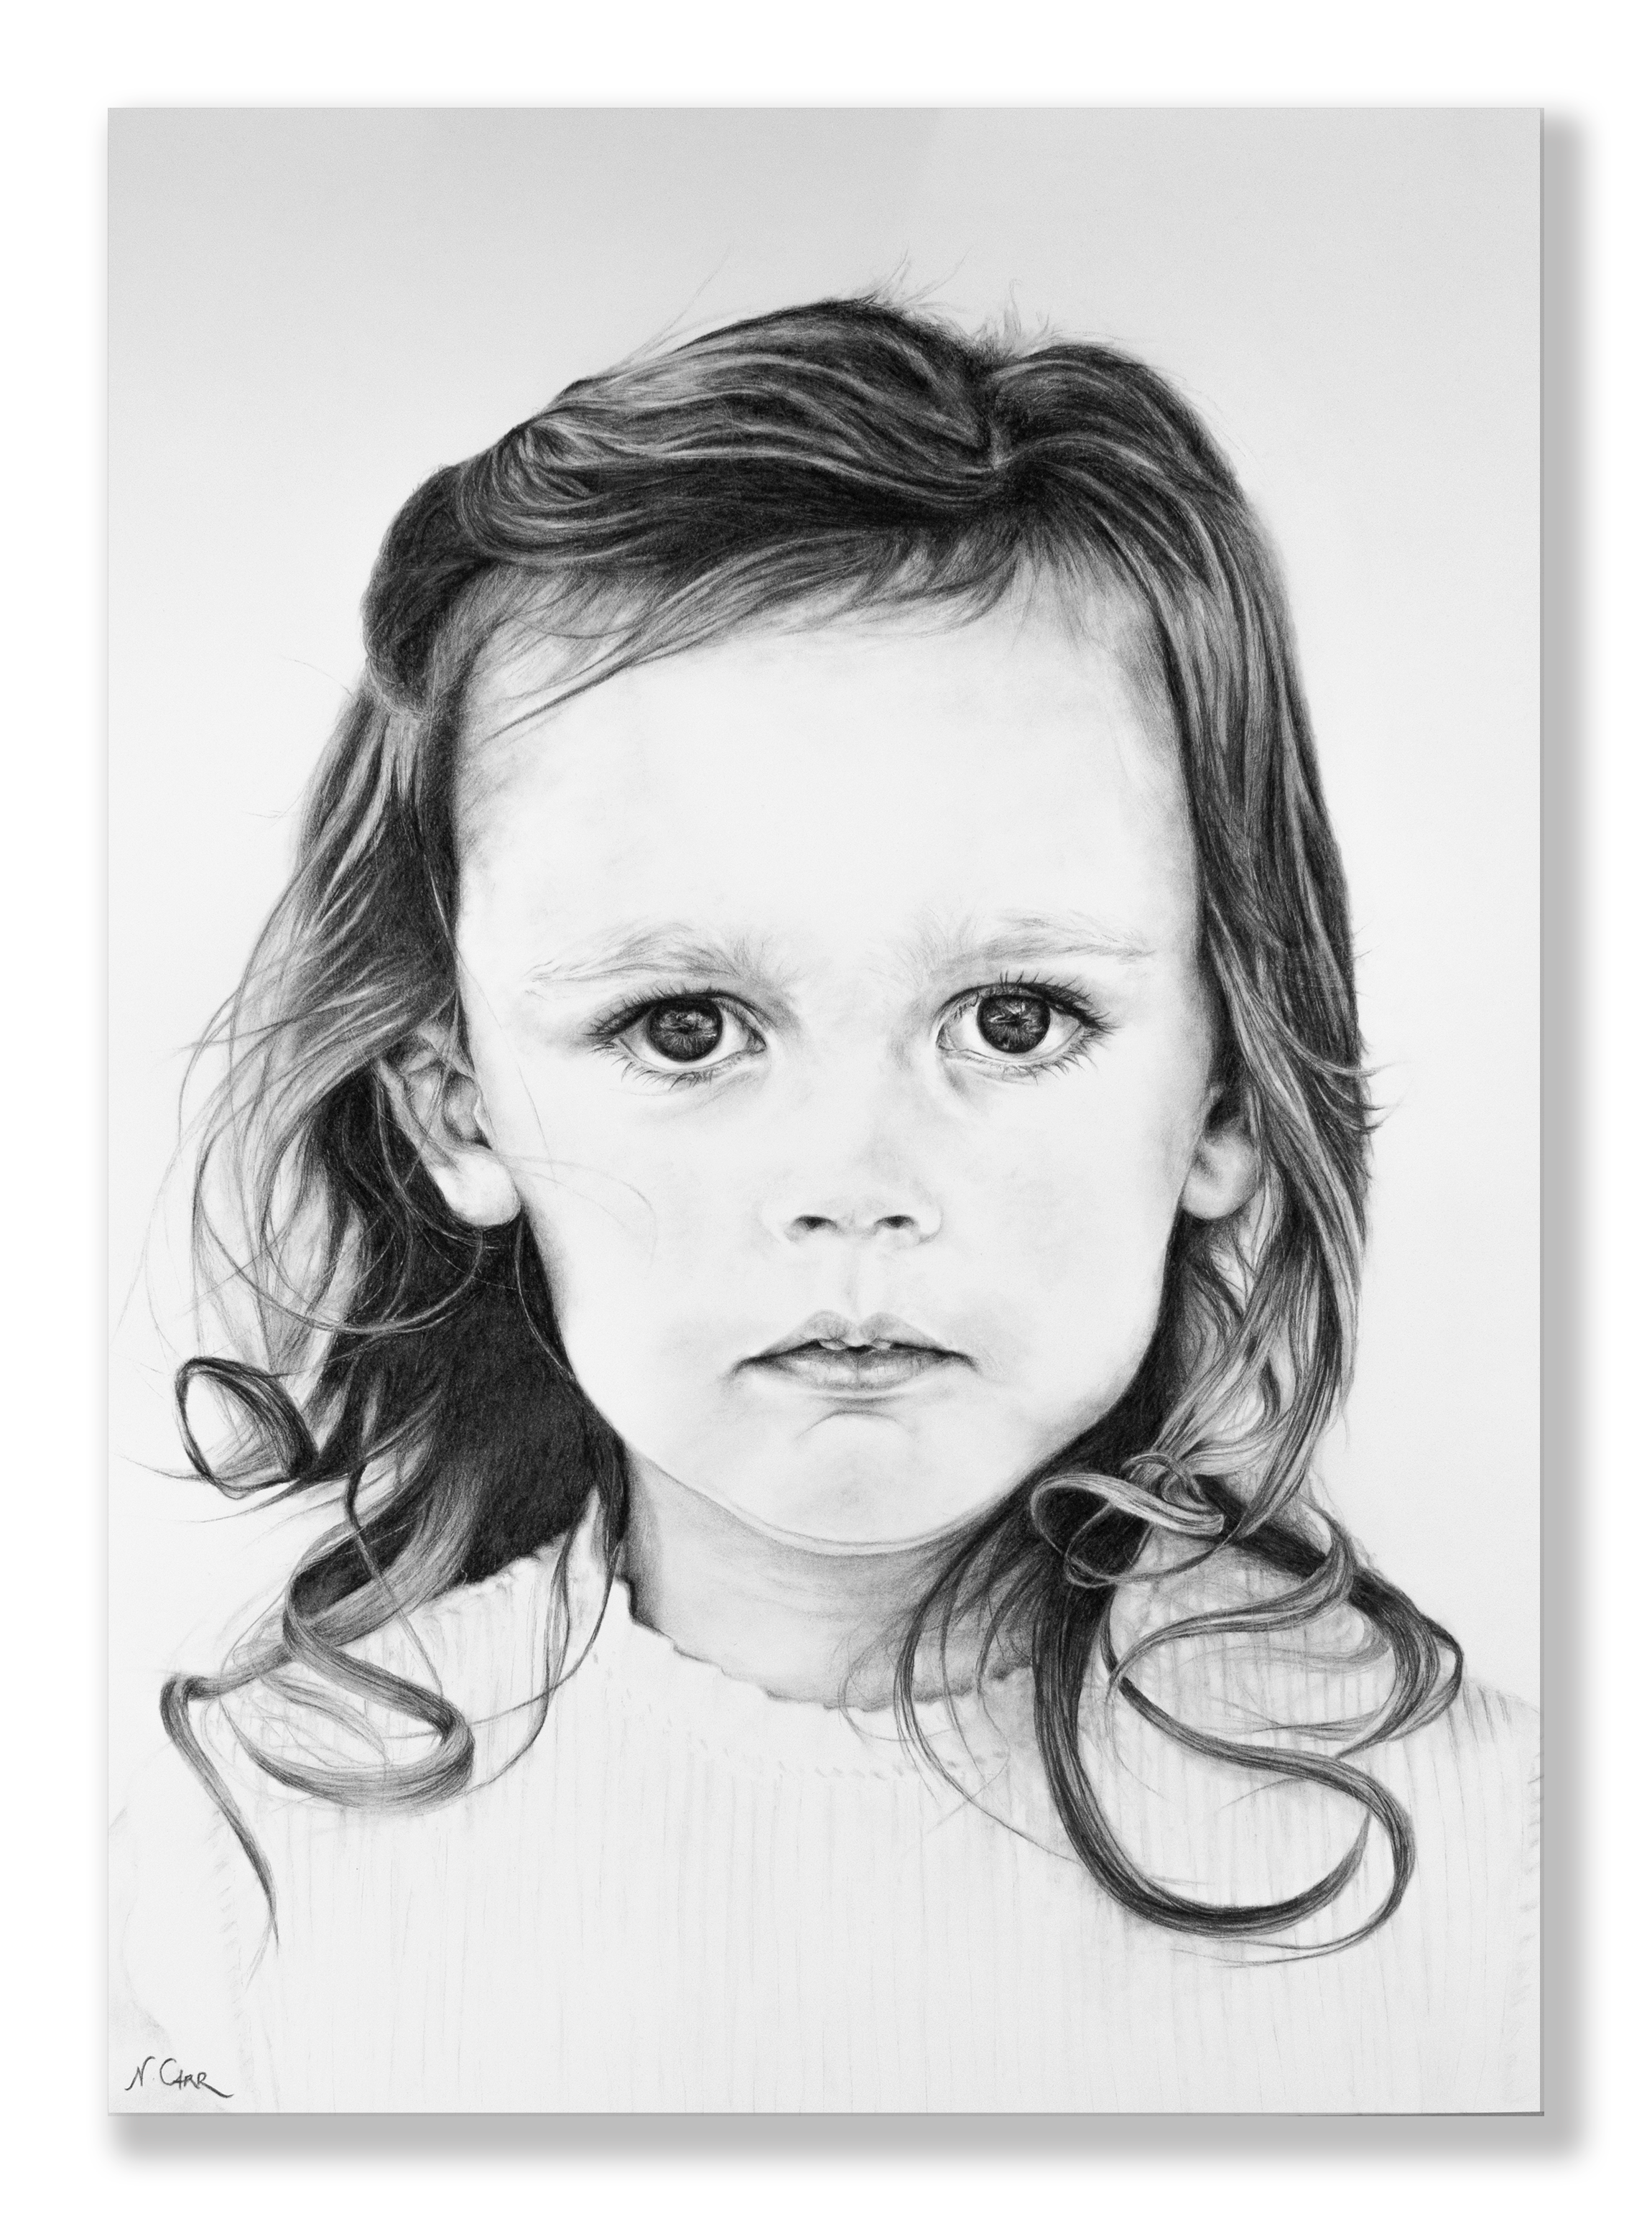 Private Commission in Charcoal by artist Nikki Carr